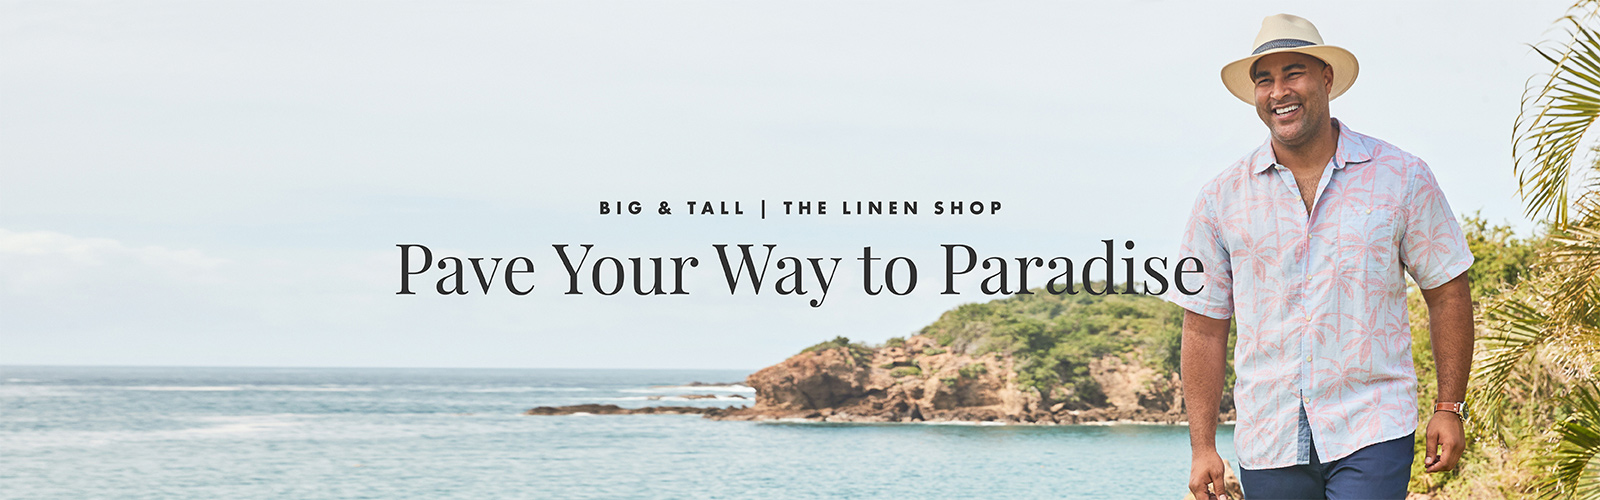 Big & Tall | The Linen Shop - Pave Your Way to Paradise